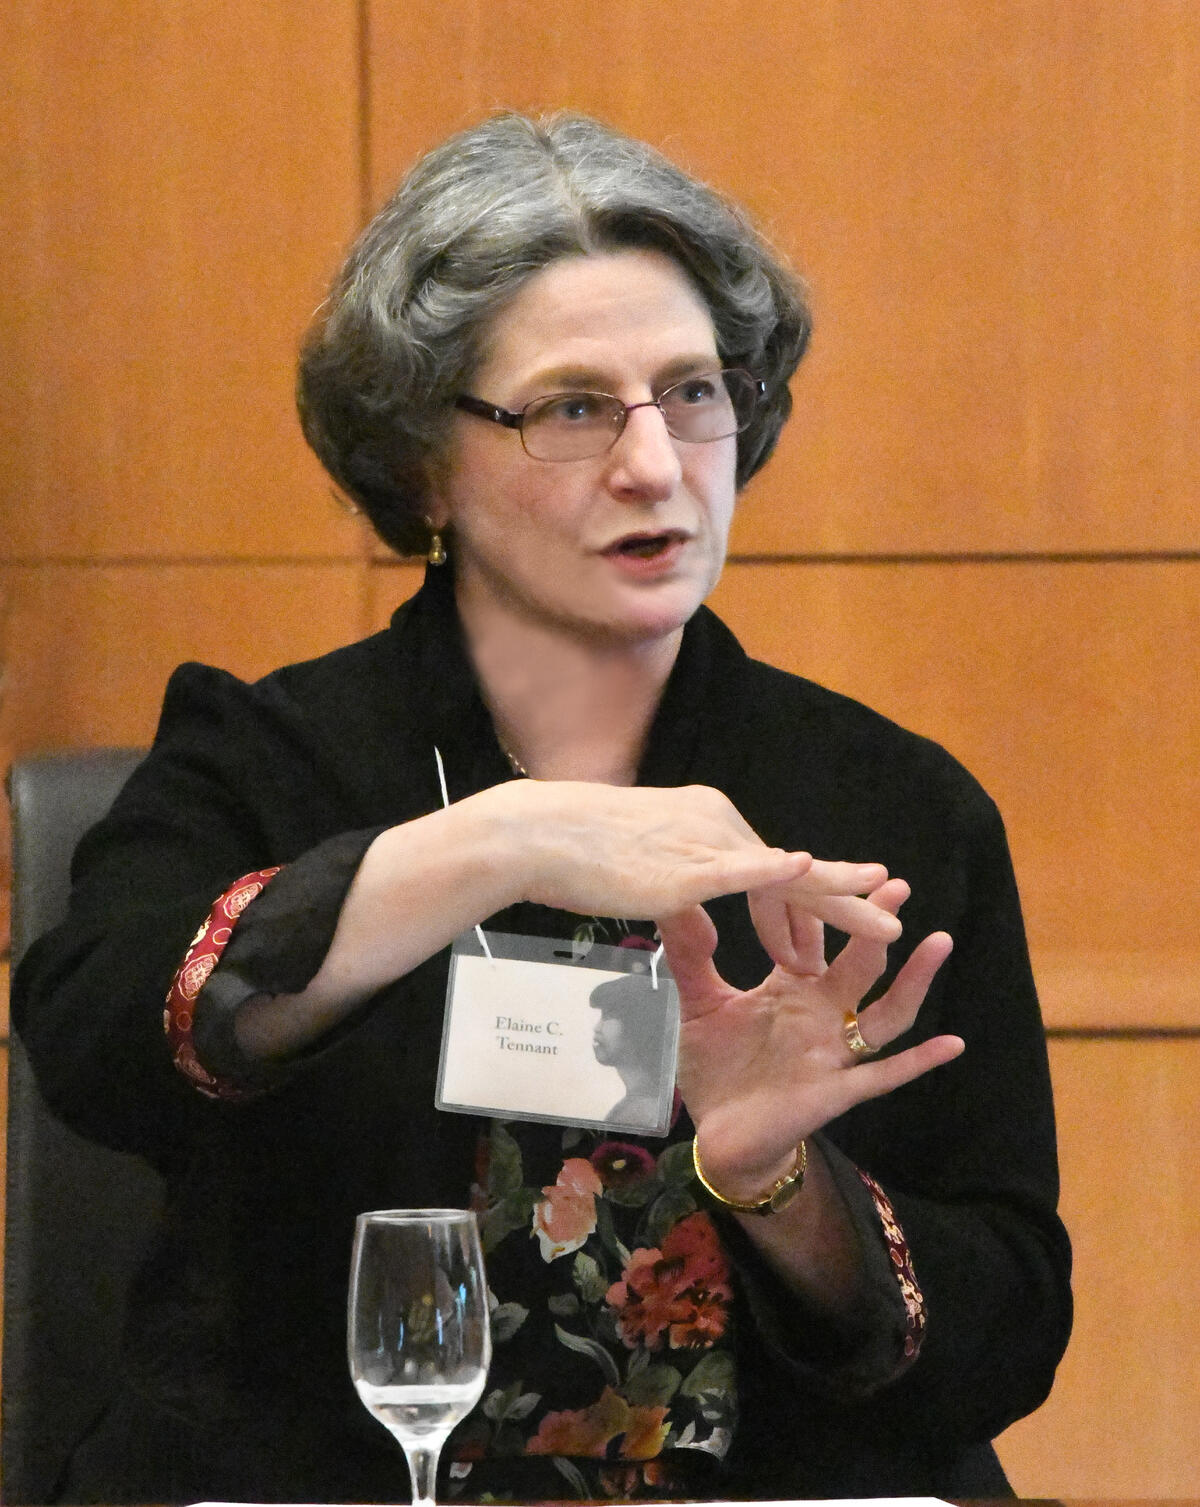 ID: image of Elaine Tennant mid-speech in glasses,  floral black top, name tag, and jewelry using hand gestures to illustrate a point